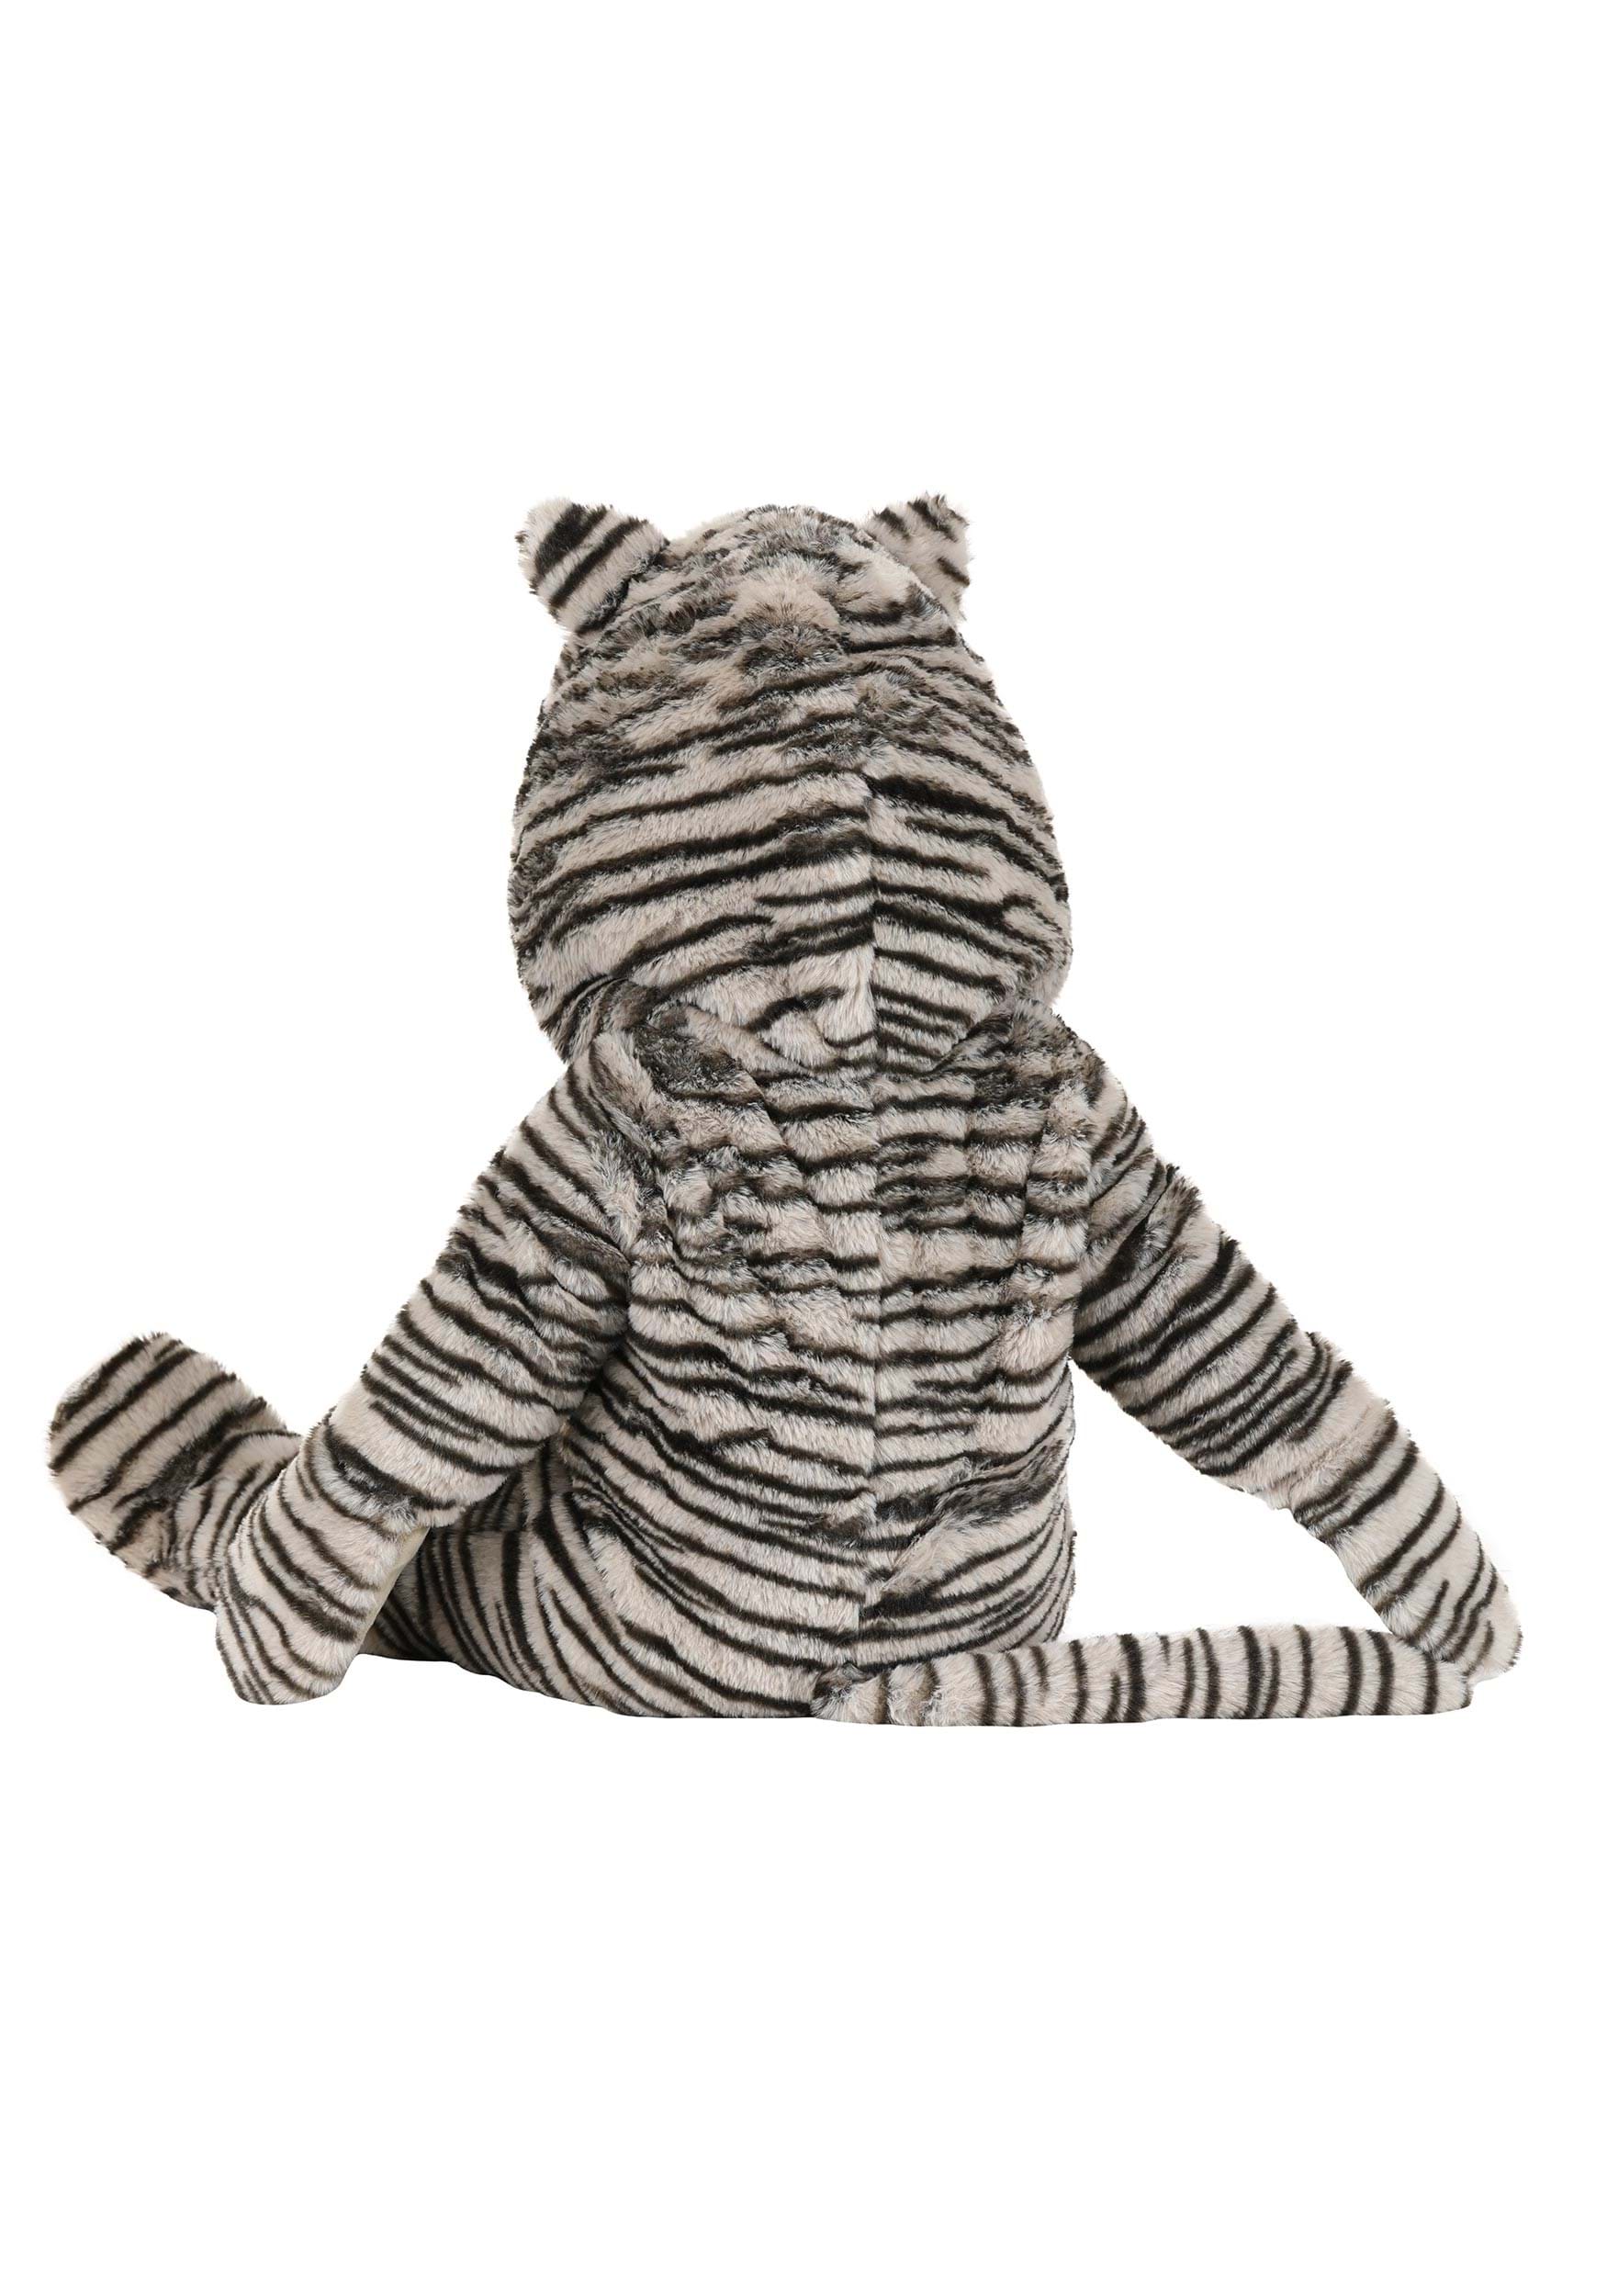 Grey Striped Kitty Infant Costume